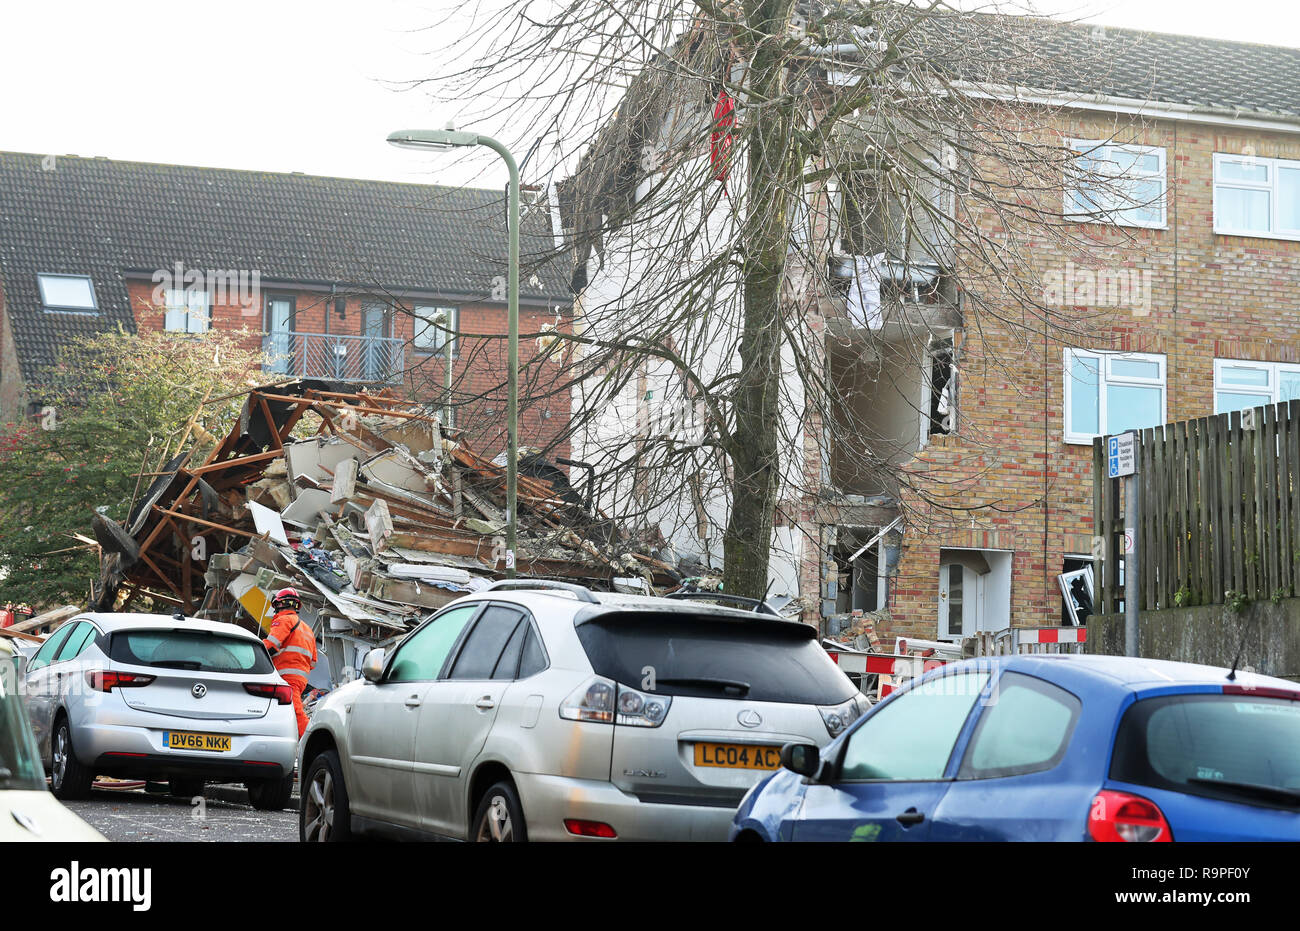 The scene in Launcelot Close, Andover, where Hampshire Police say that the body of a man has been found after an explosion caused a building to collapse this morning. Stock Photo